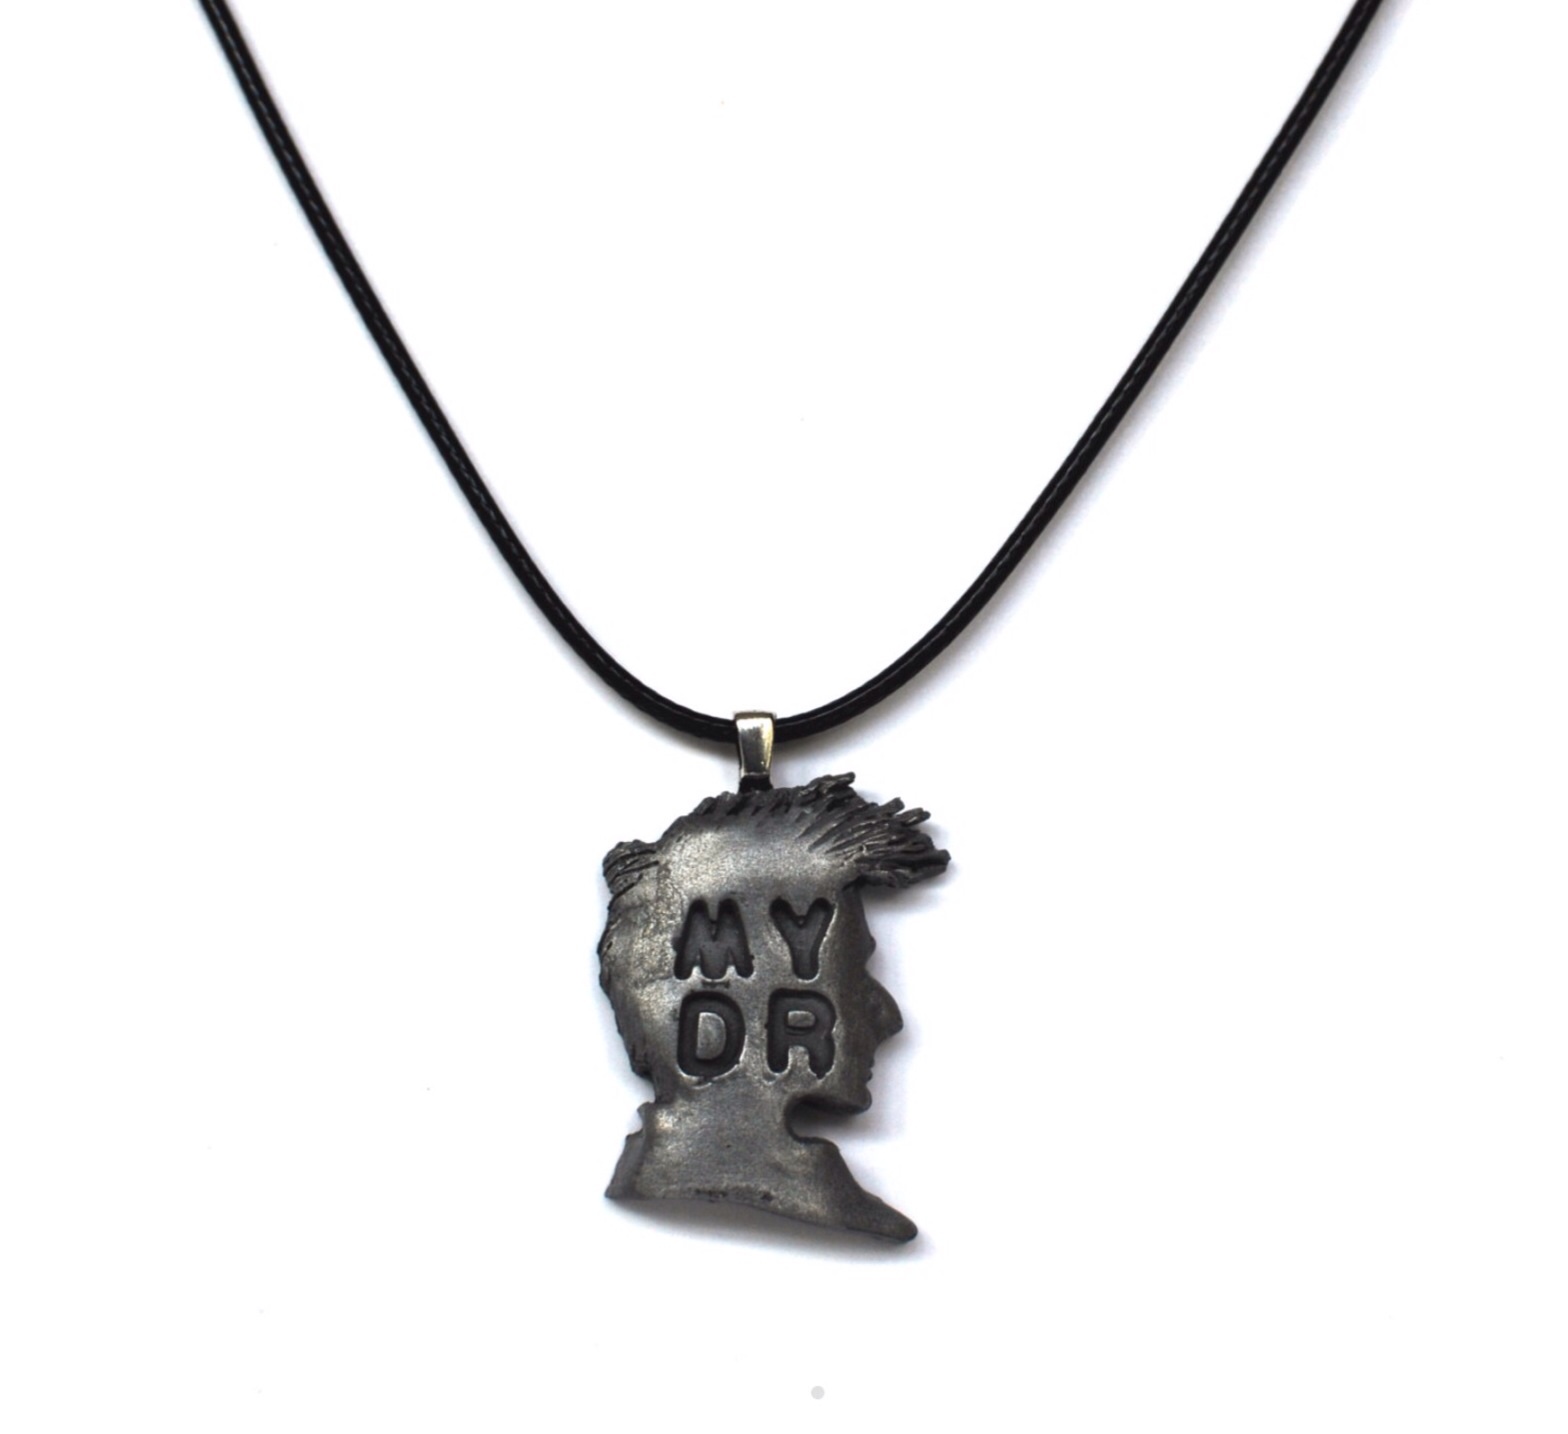 Our 10th Dr inspired "MY DR" necklace